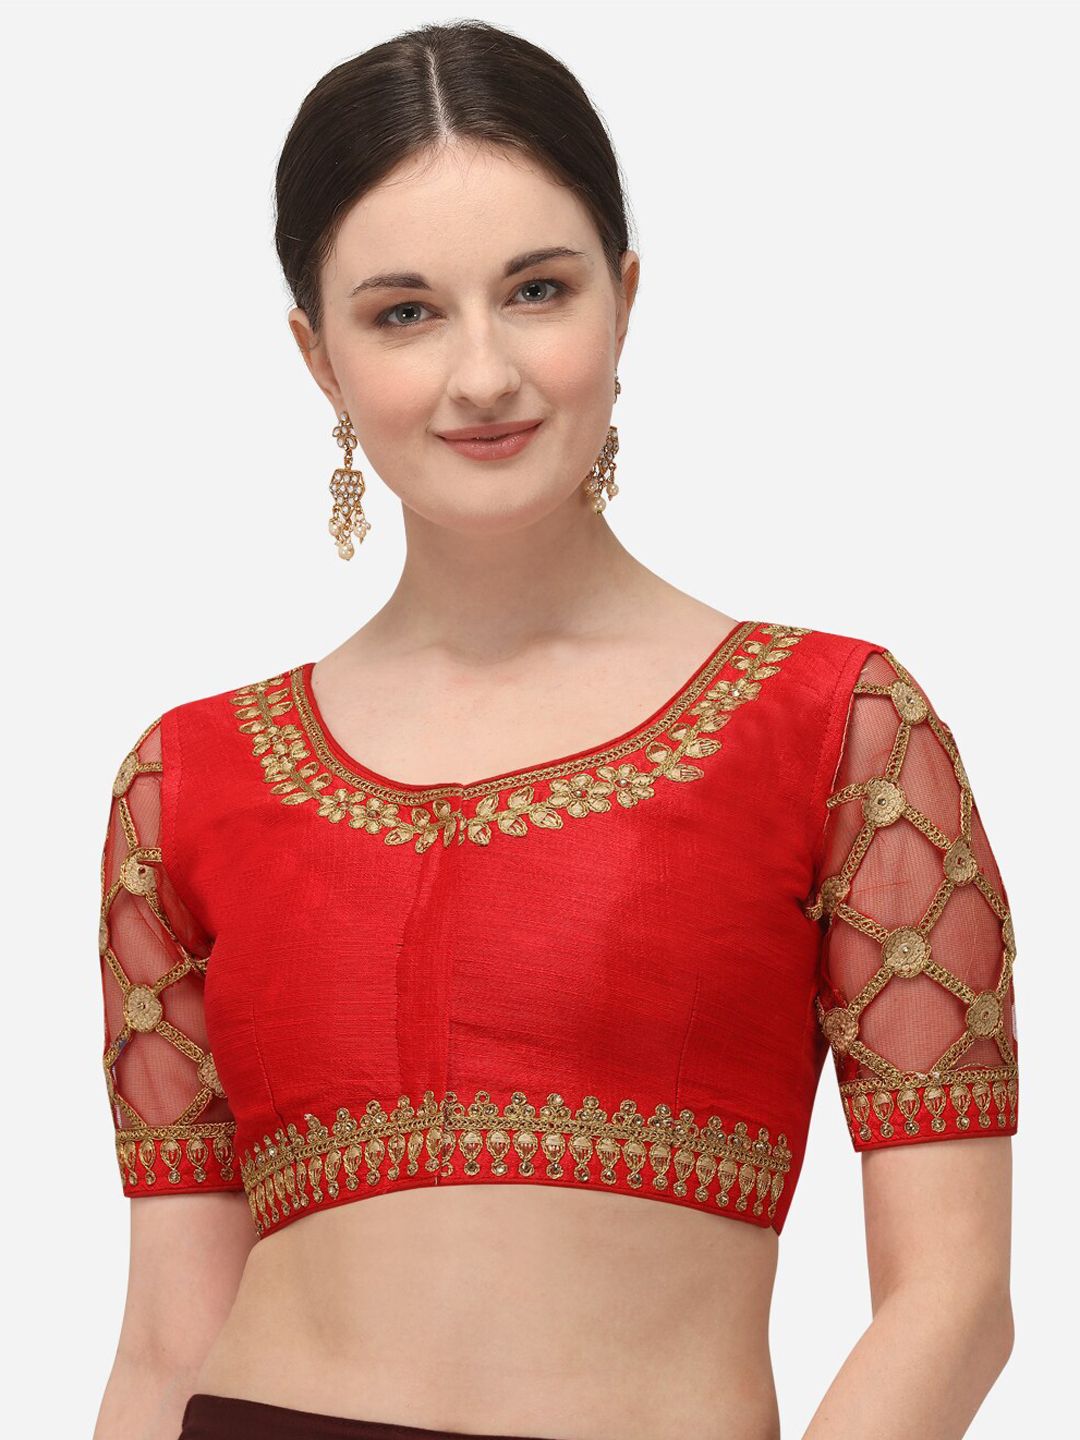 Amrutam Fab Women Red & Beige Embroidered Raw Silk Saree Blouse Price in India